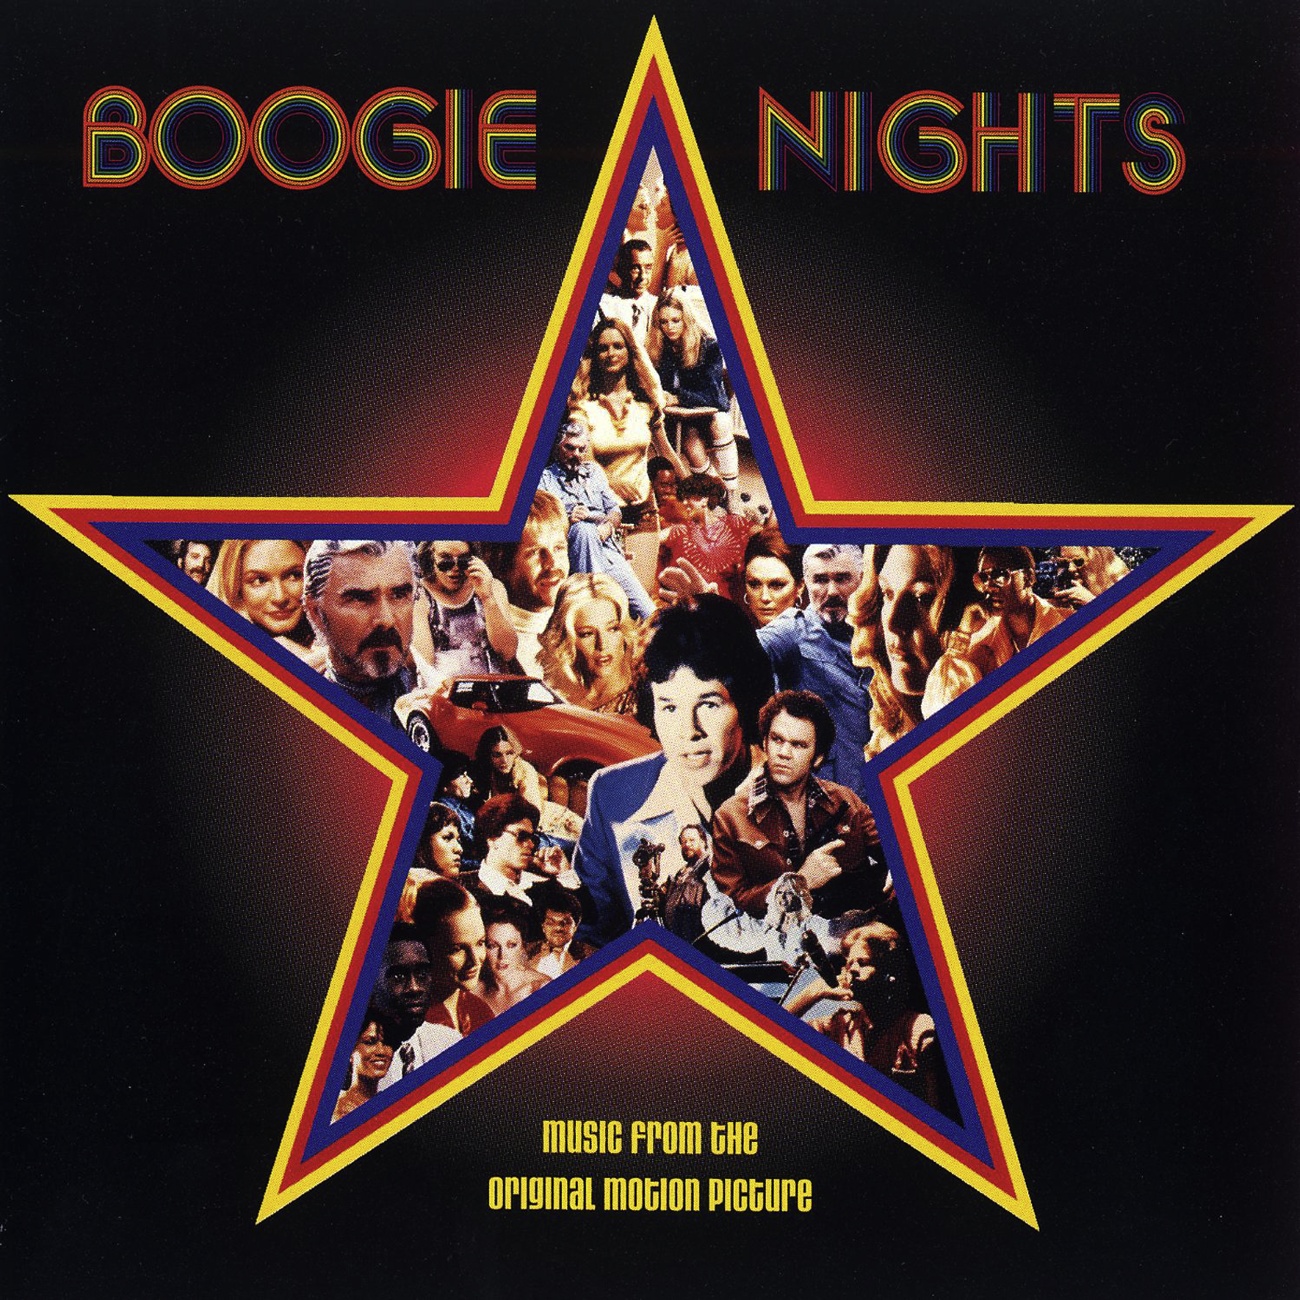 The Big Top (Theme From "Boogie Nights")